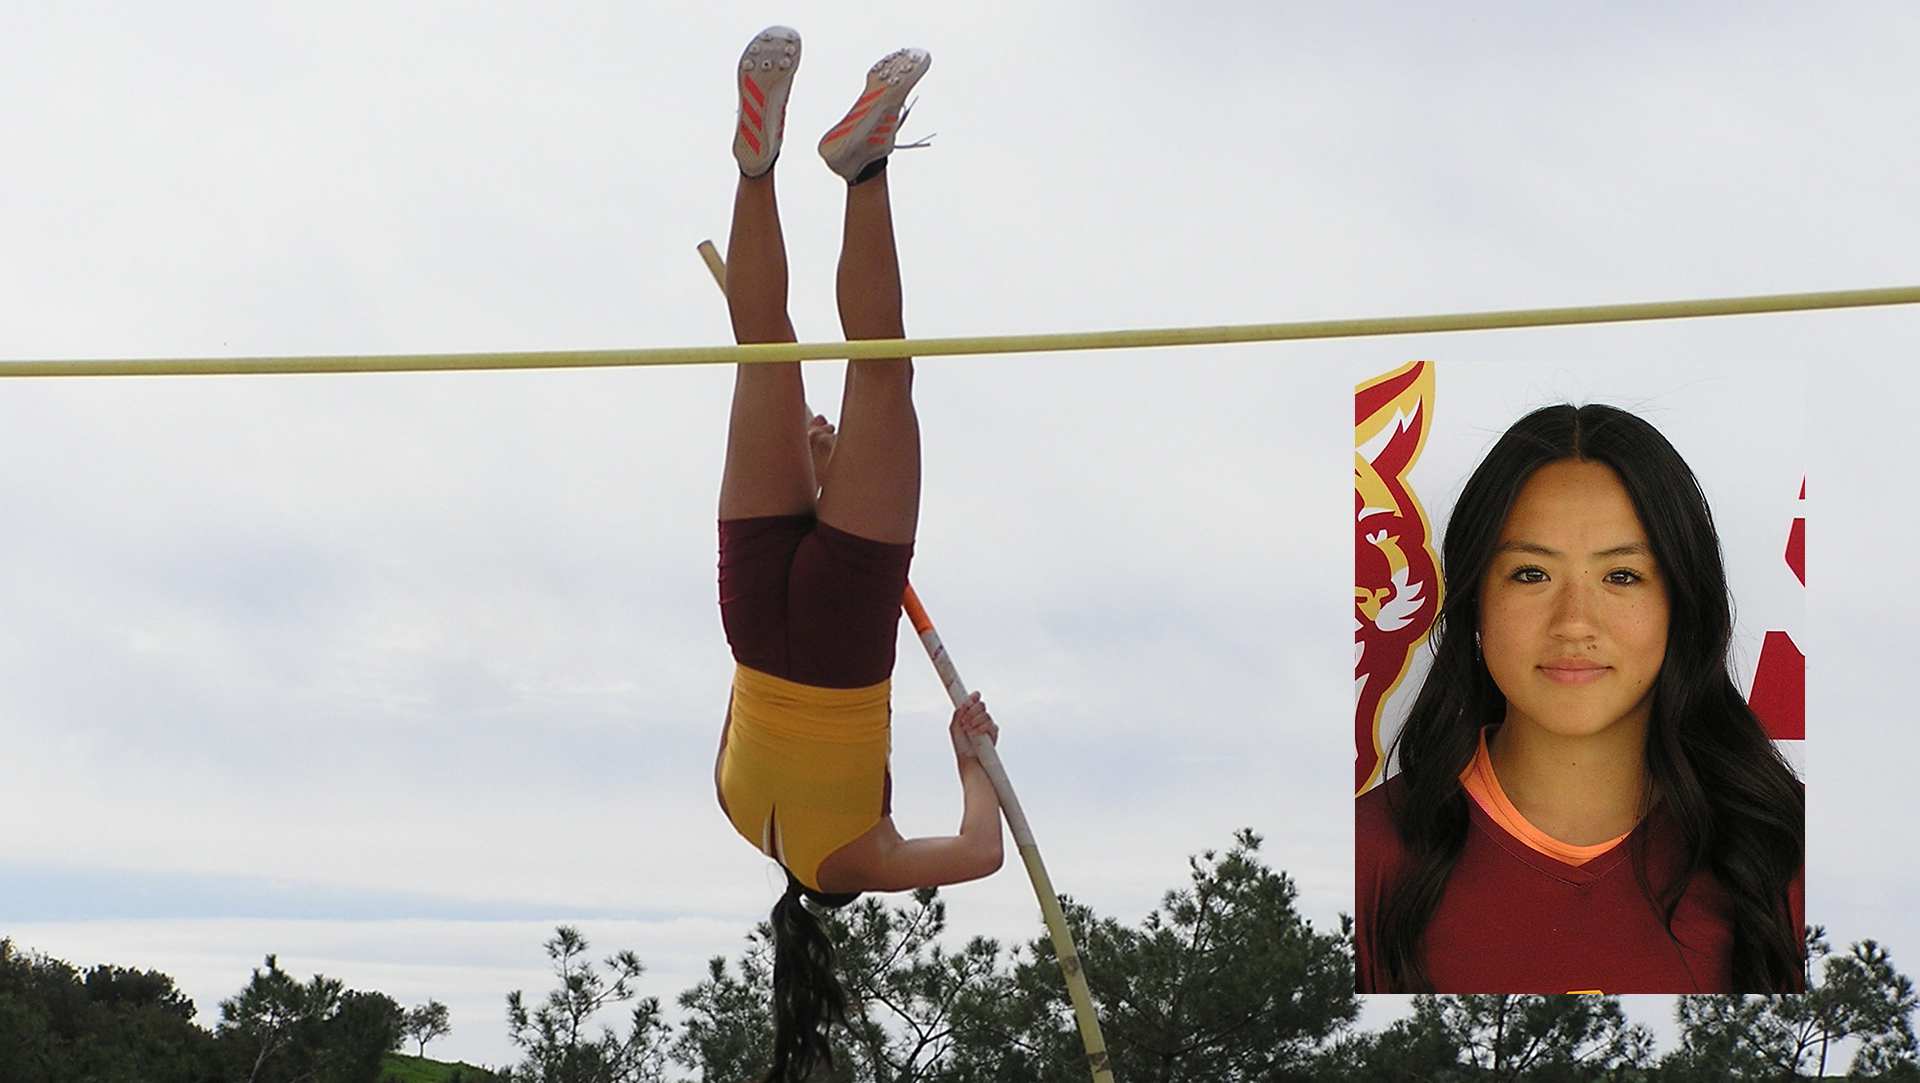 Teh finishes fourth in the pole vault